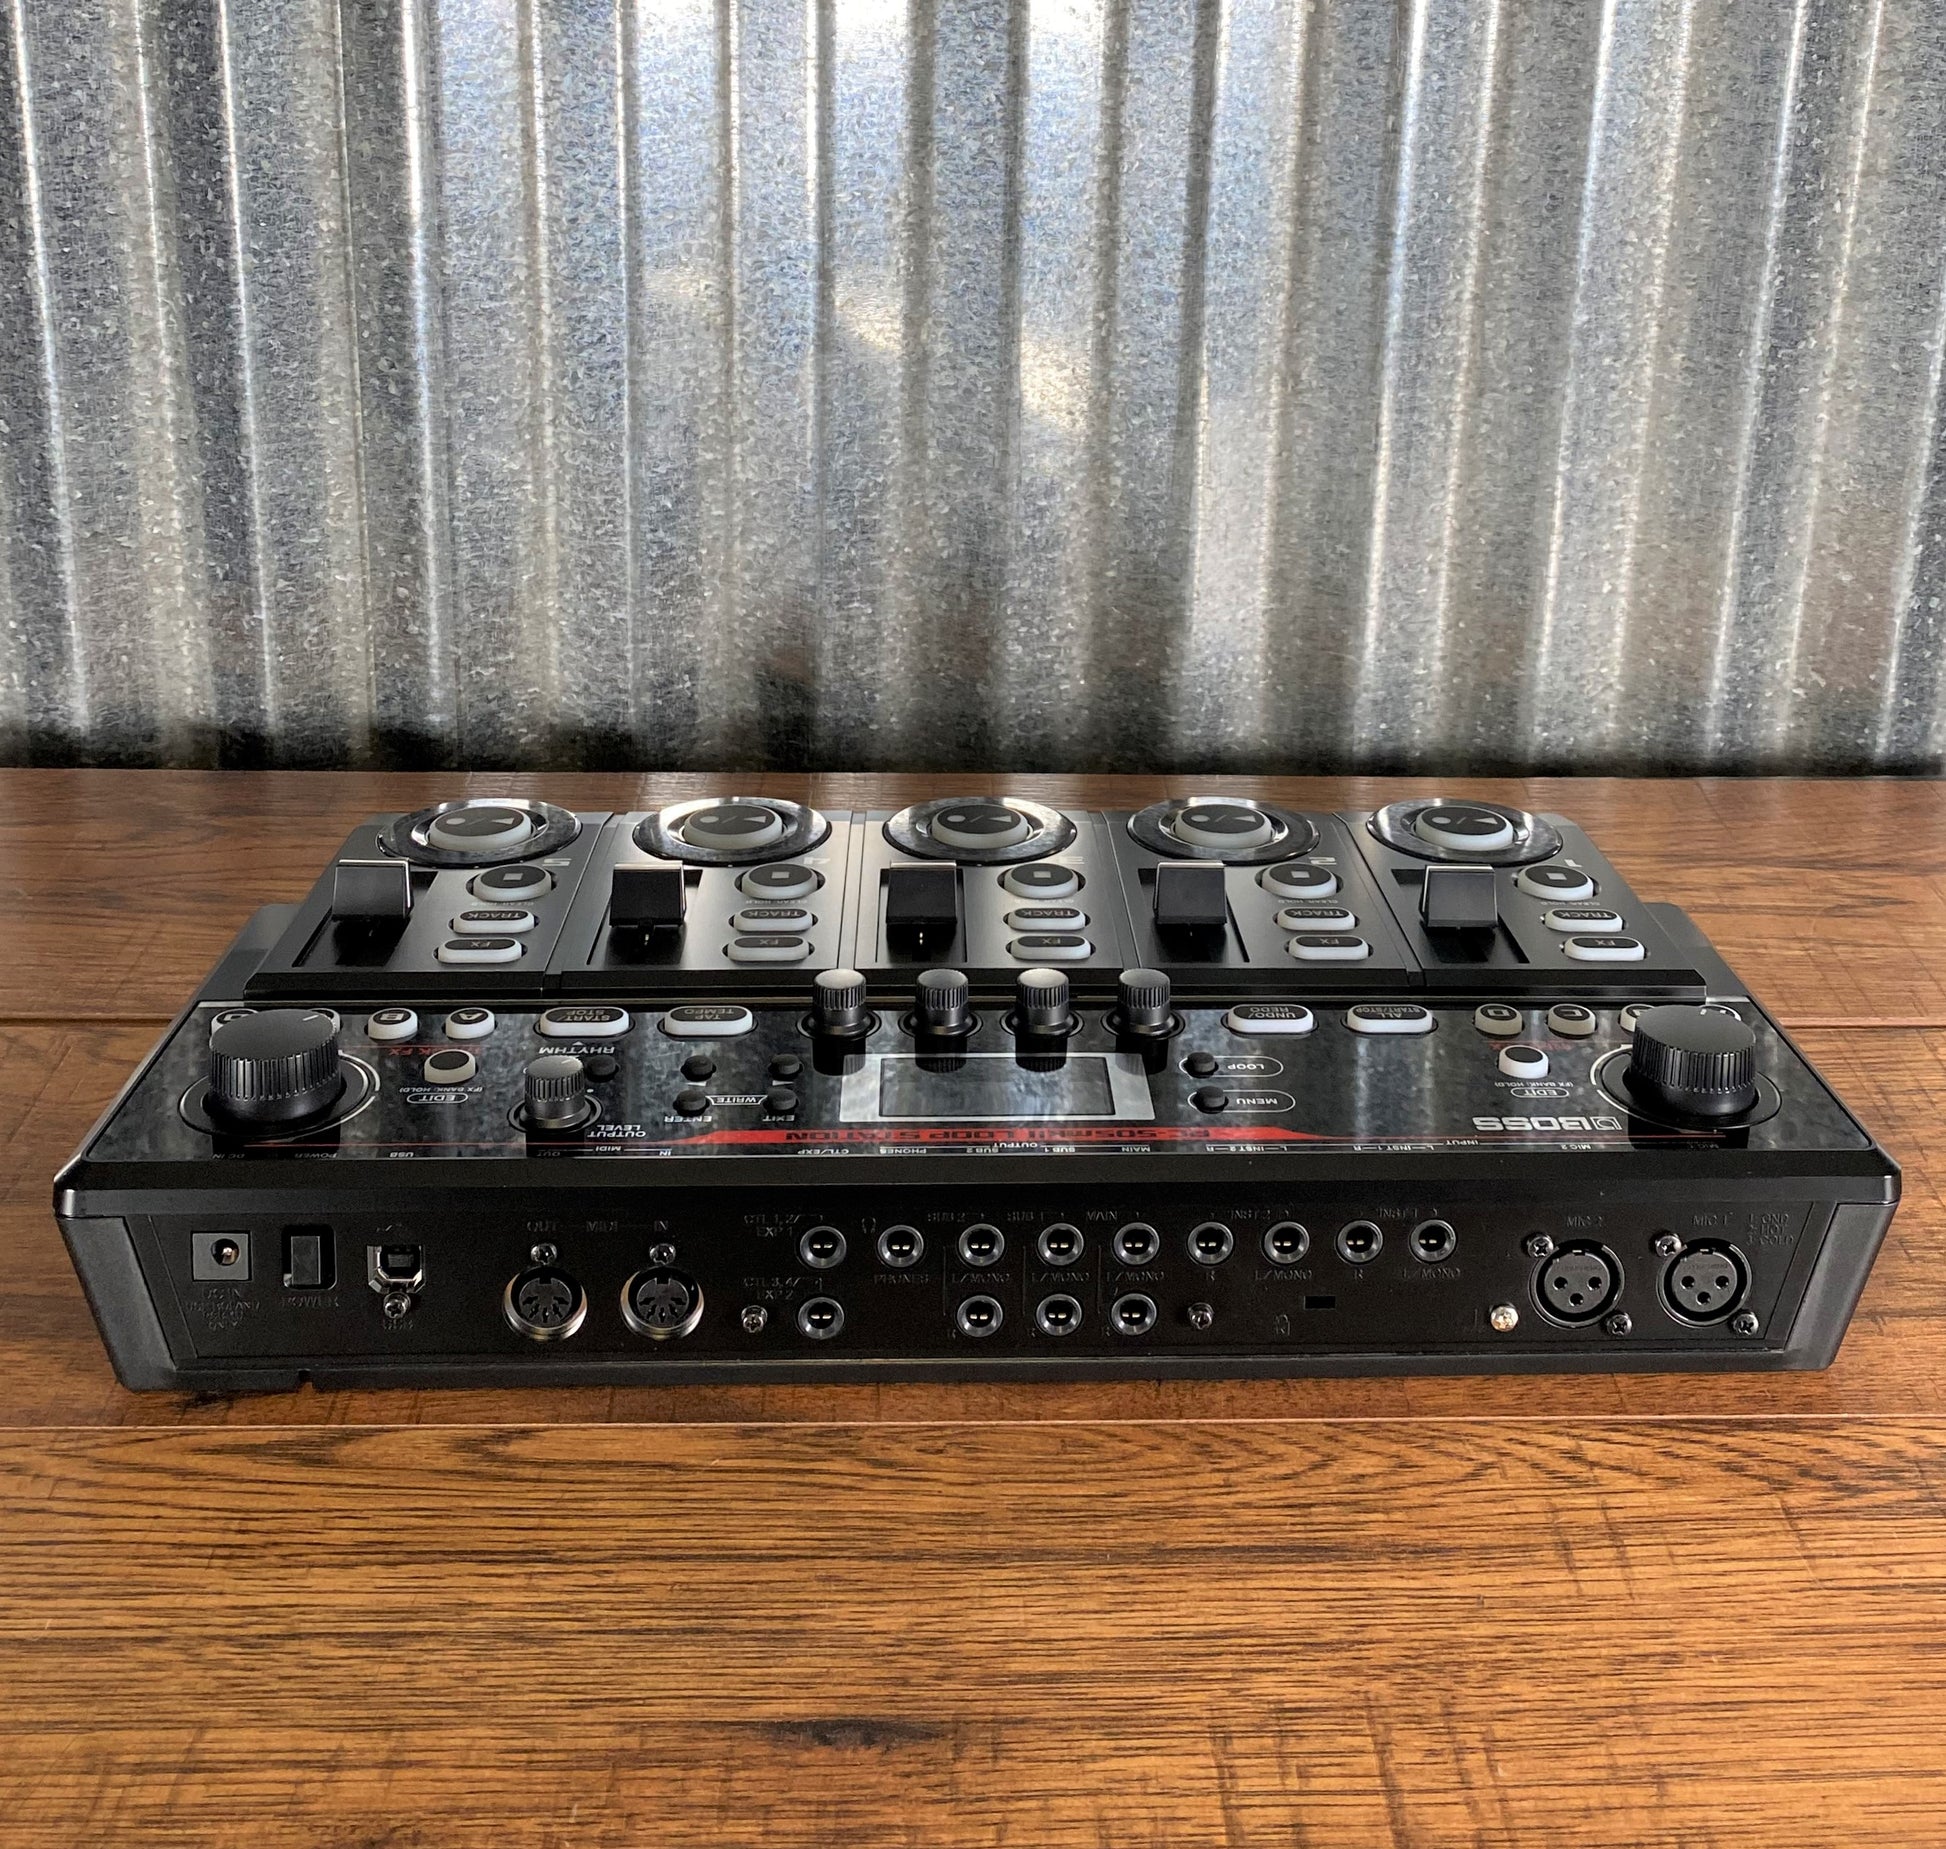 BOSS RC-505MKII Loop Station – The Industry Standard Tabletop Looper,  Updated and Enhanced. Class-leading sound quality. Five simultaneous stereo